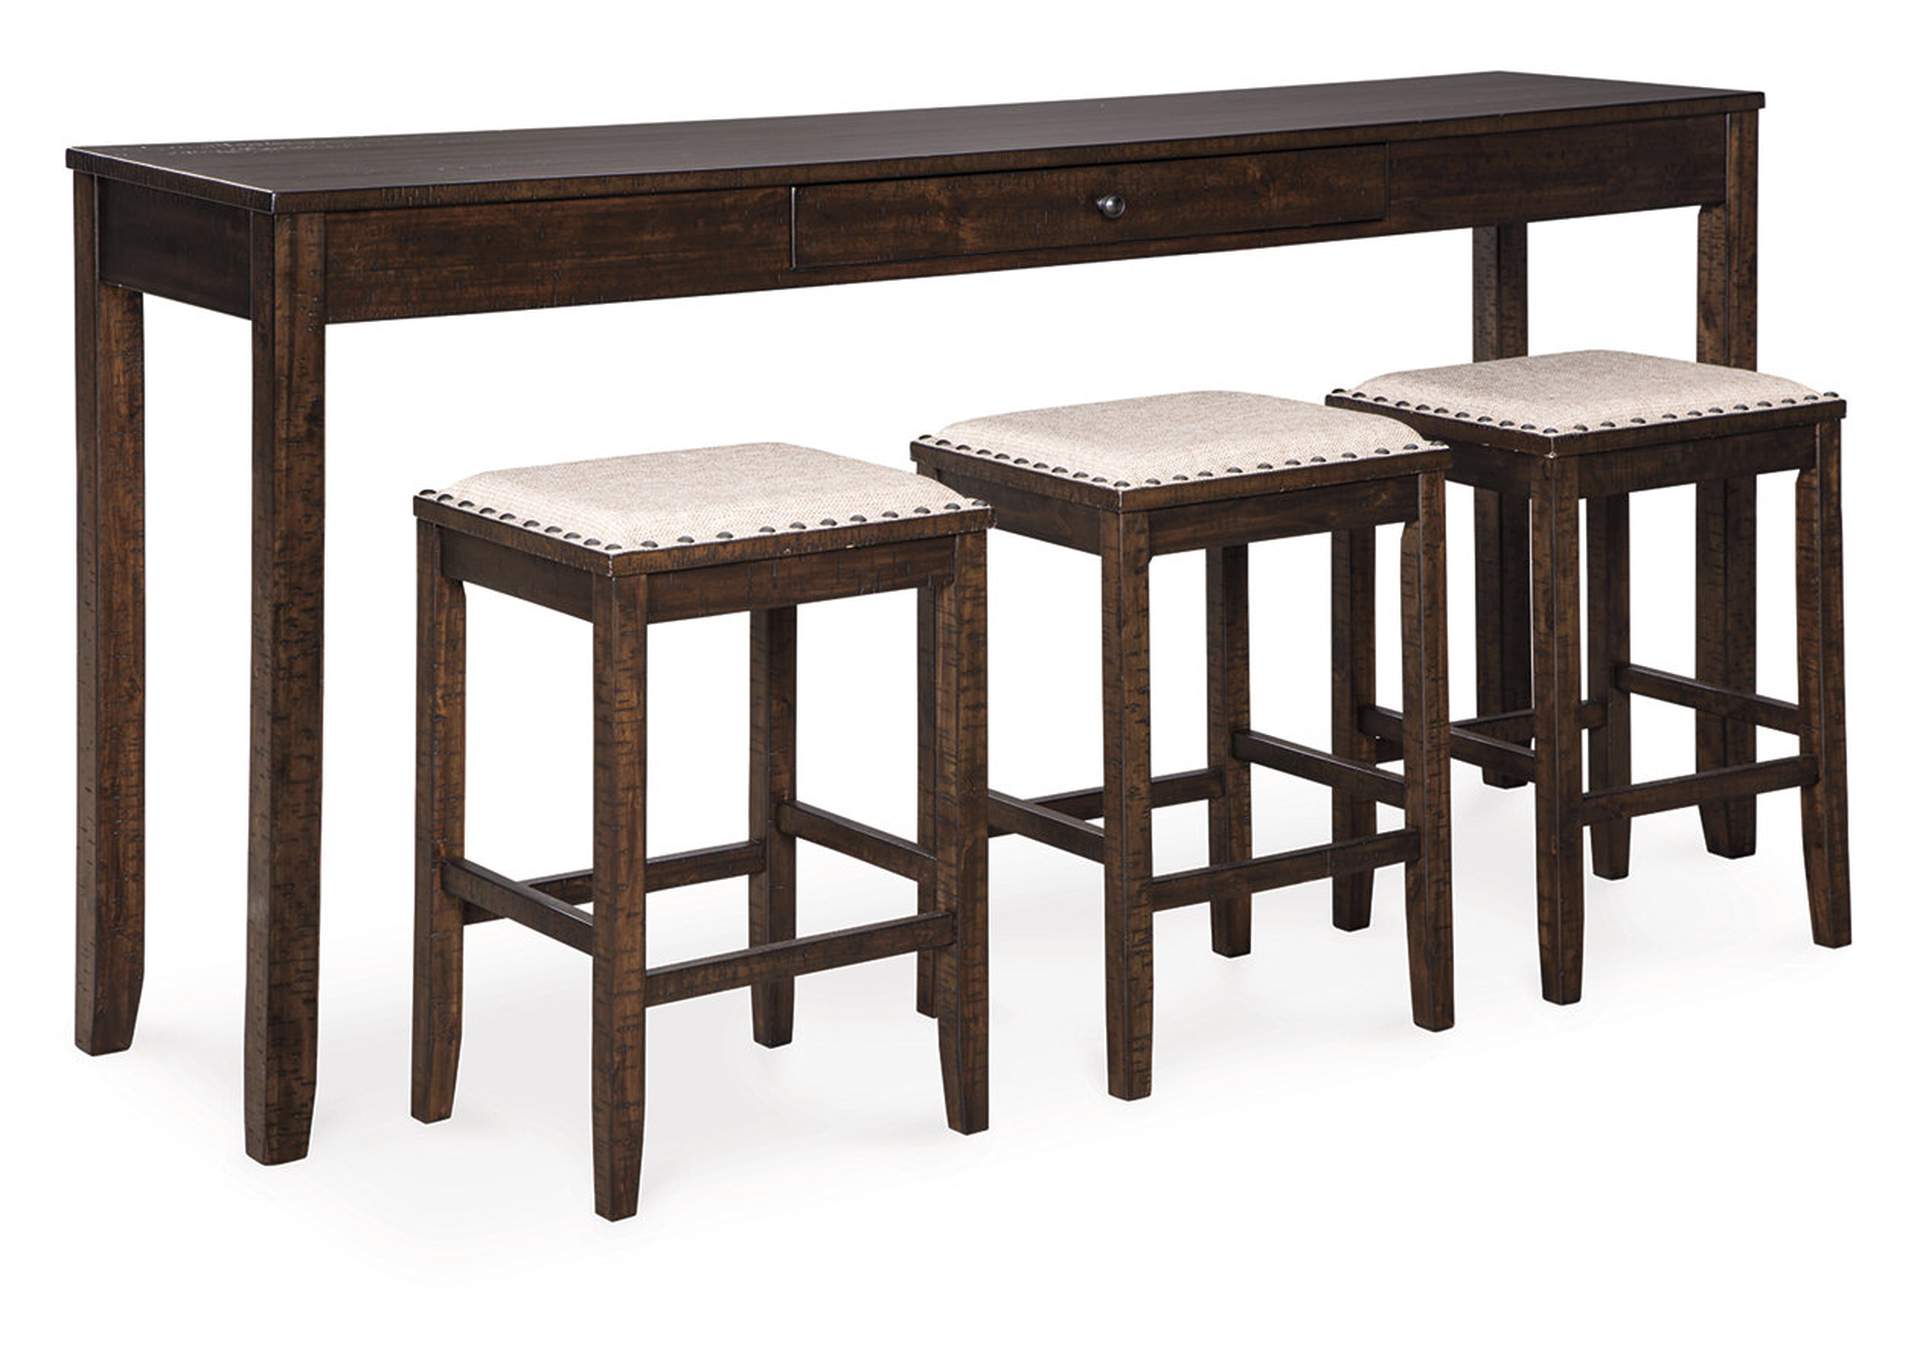 Rokane Counter Height Dining Table and Bar Stools (Set of 4),Signature Design By Ashley